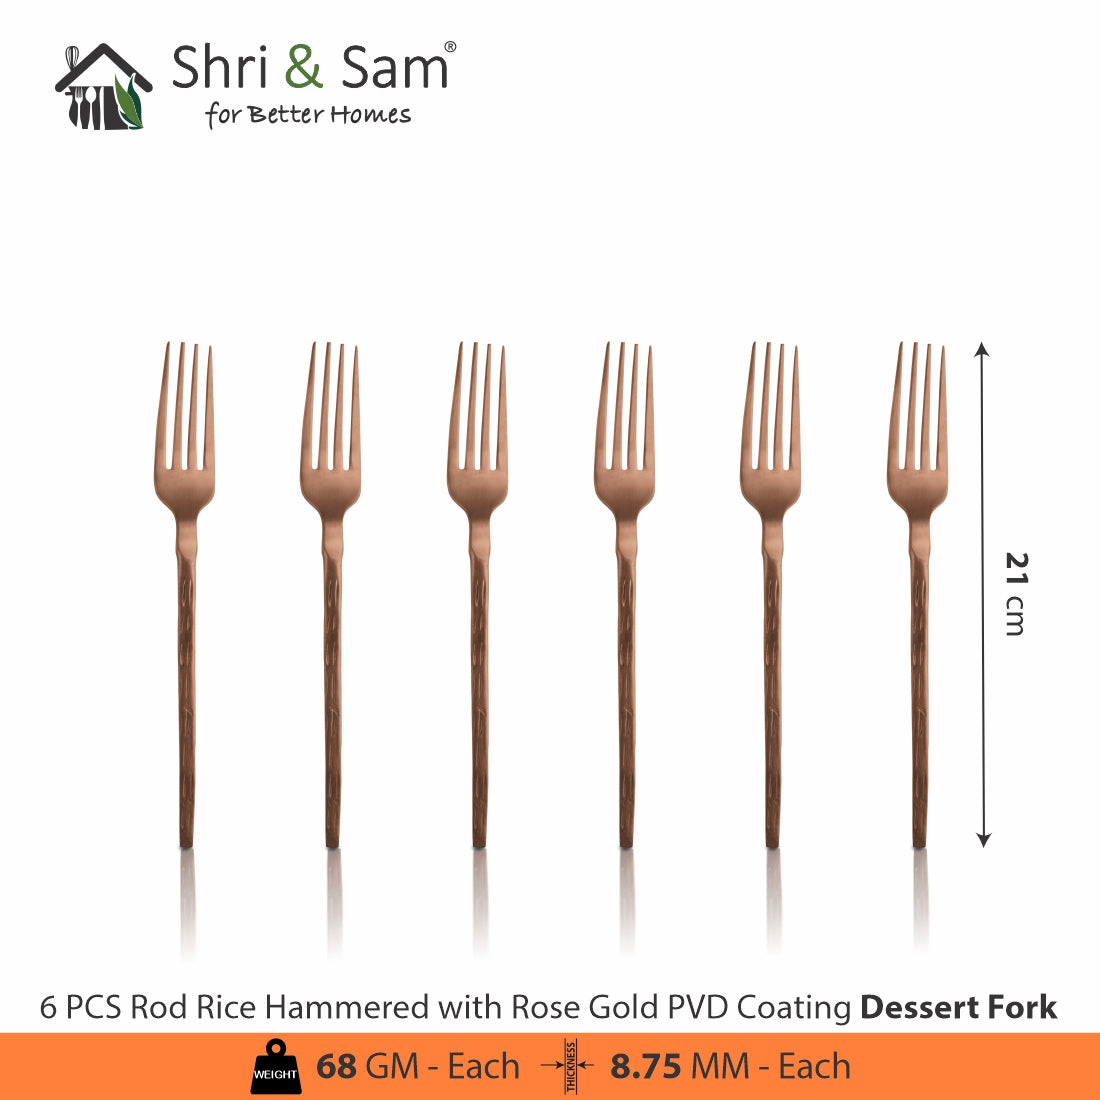 Stainless Steel Hand Crafted 24 PCS Cutlery Set with PVD Coating Rod Rice Hammered